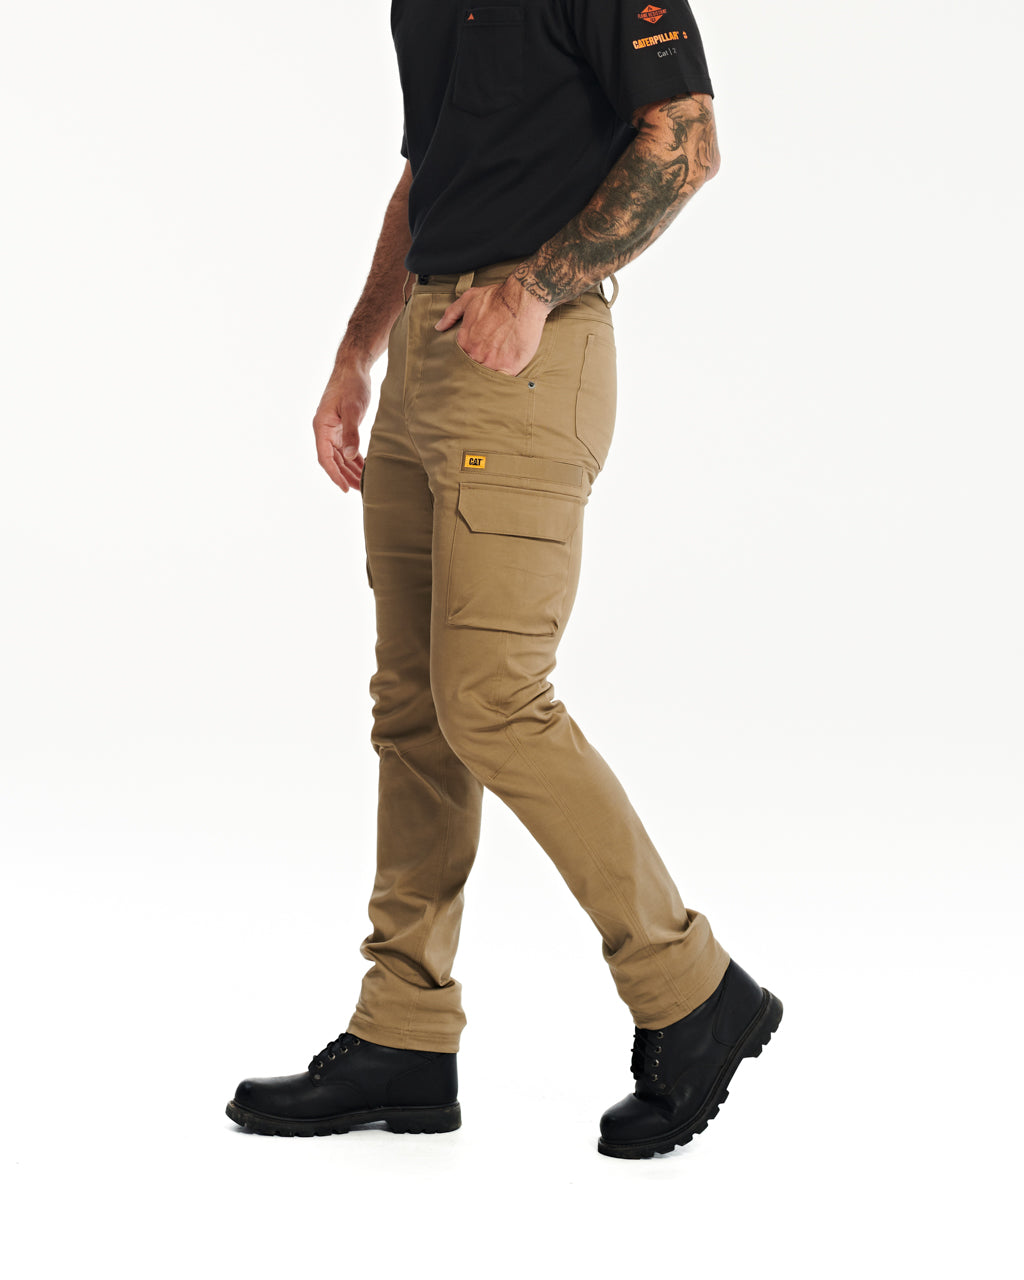 20 Best Khaki Pants for Men 2023 Tested by Style Editors